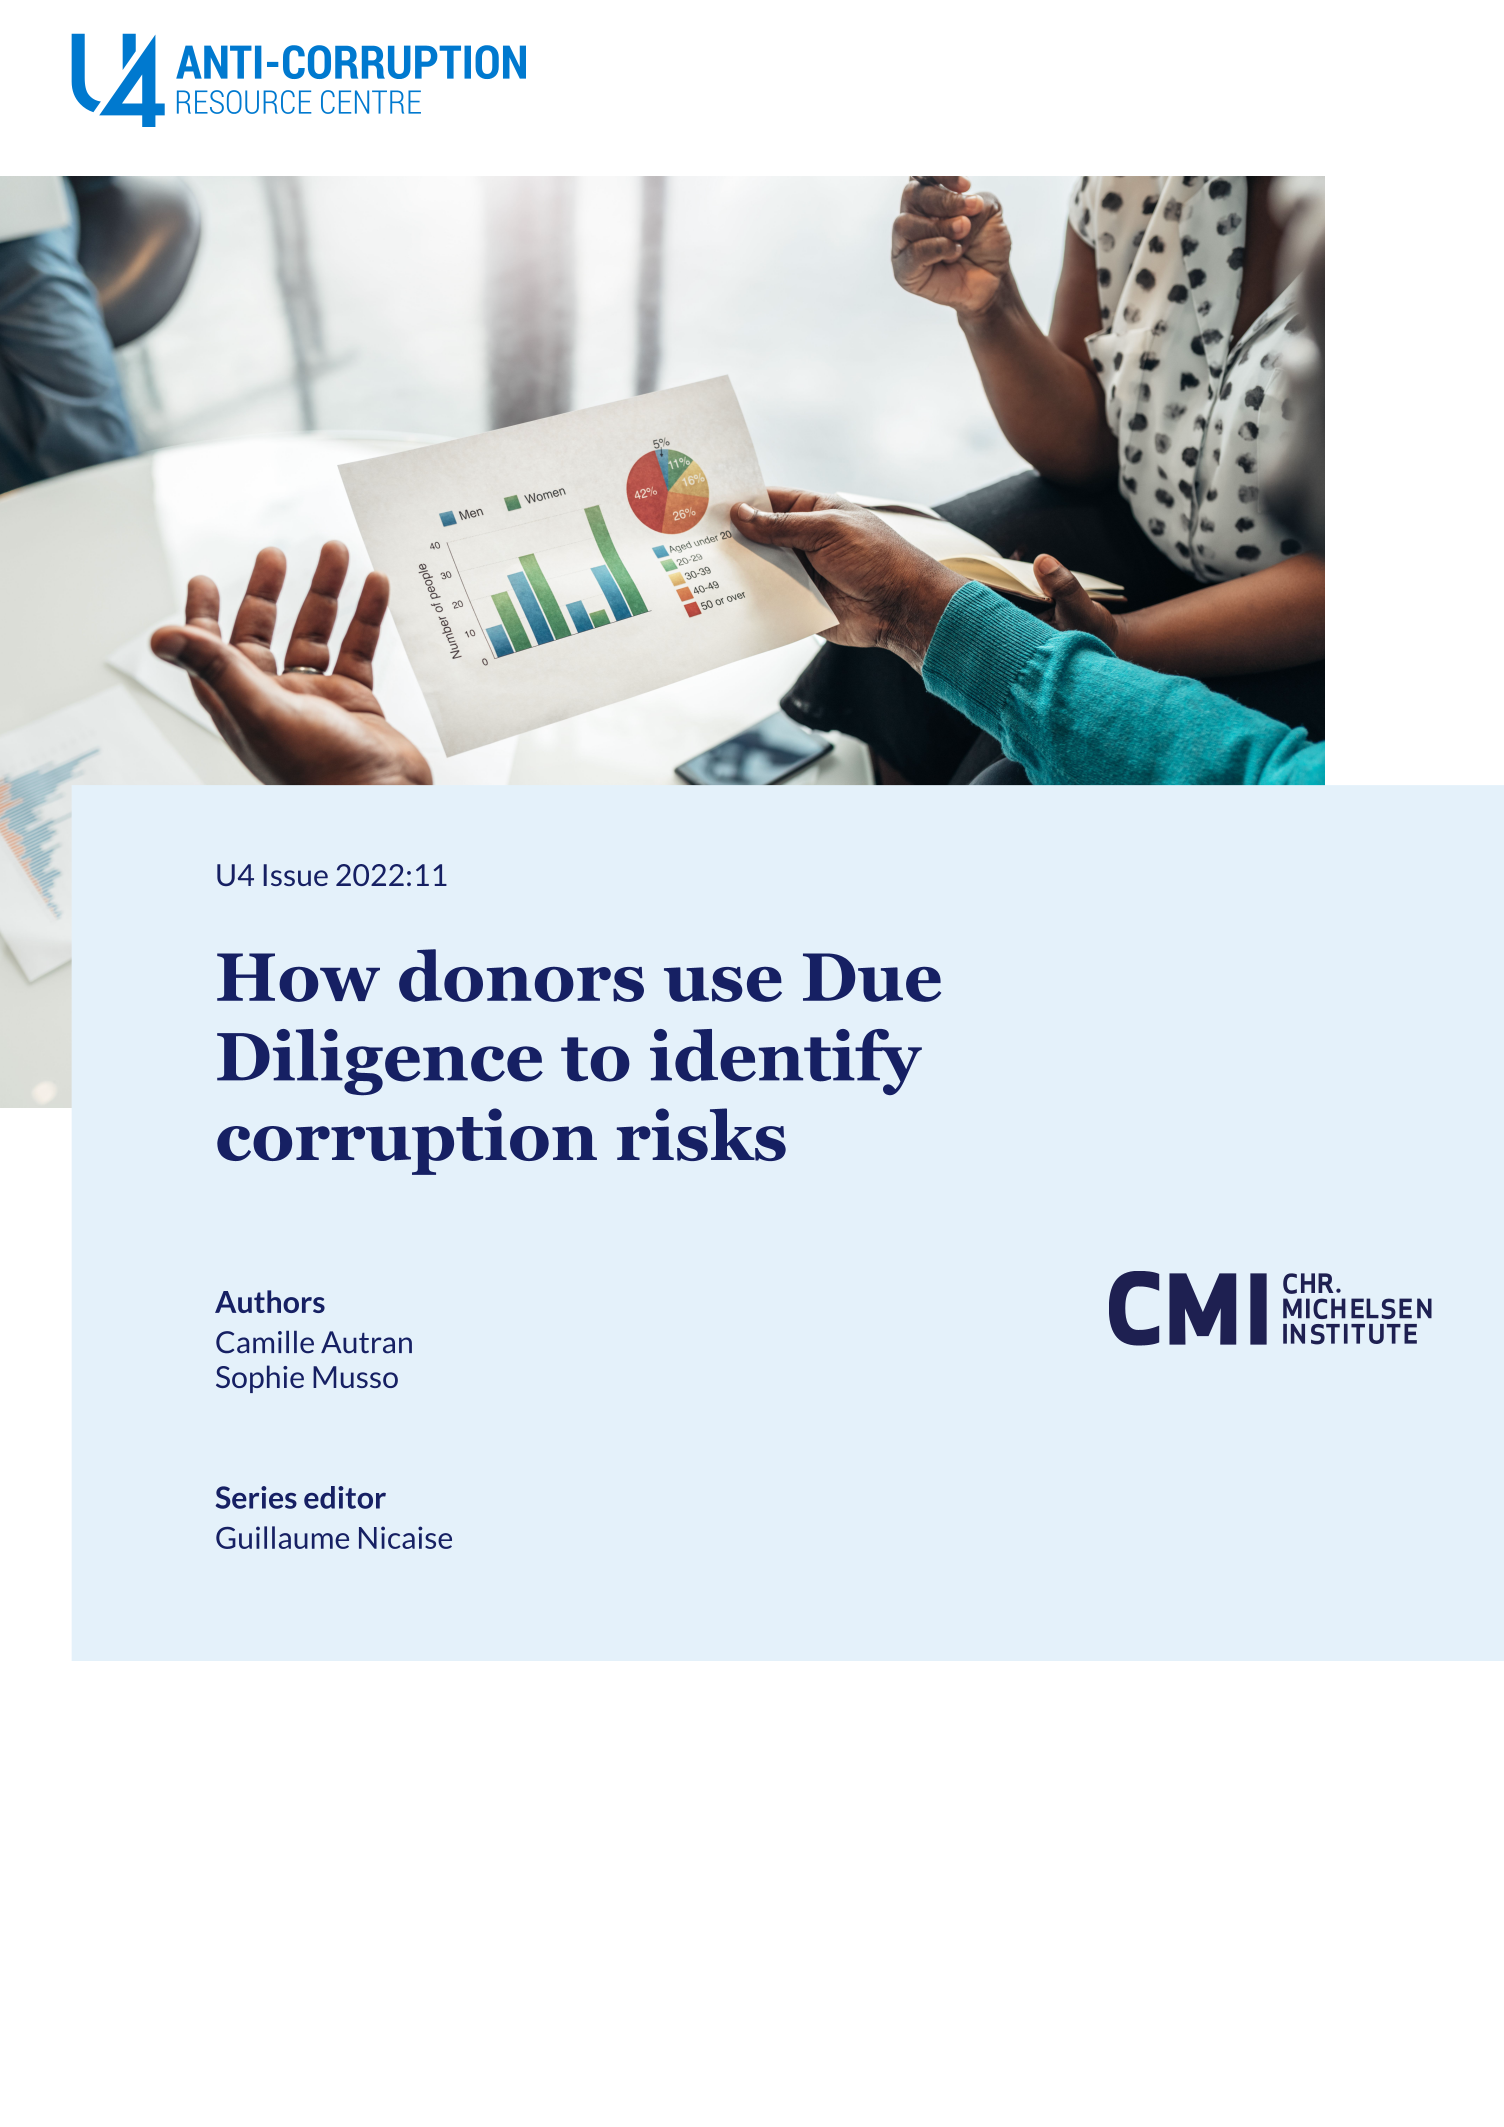 How donors use Due Diligence to identify corruption risks